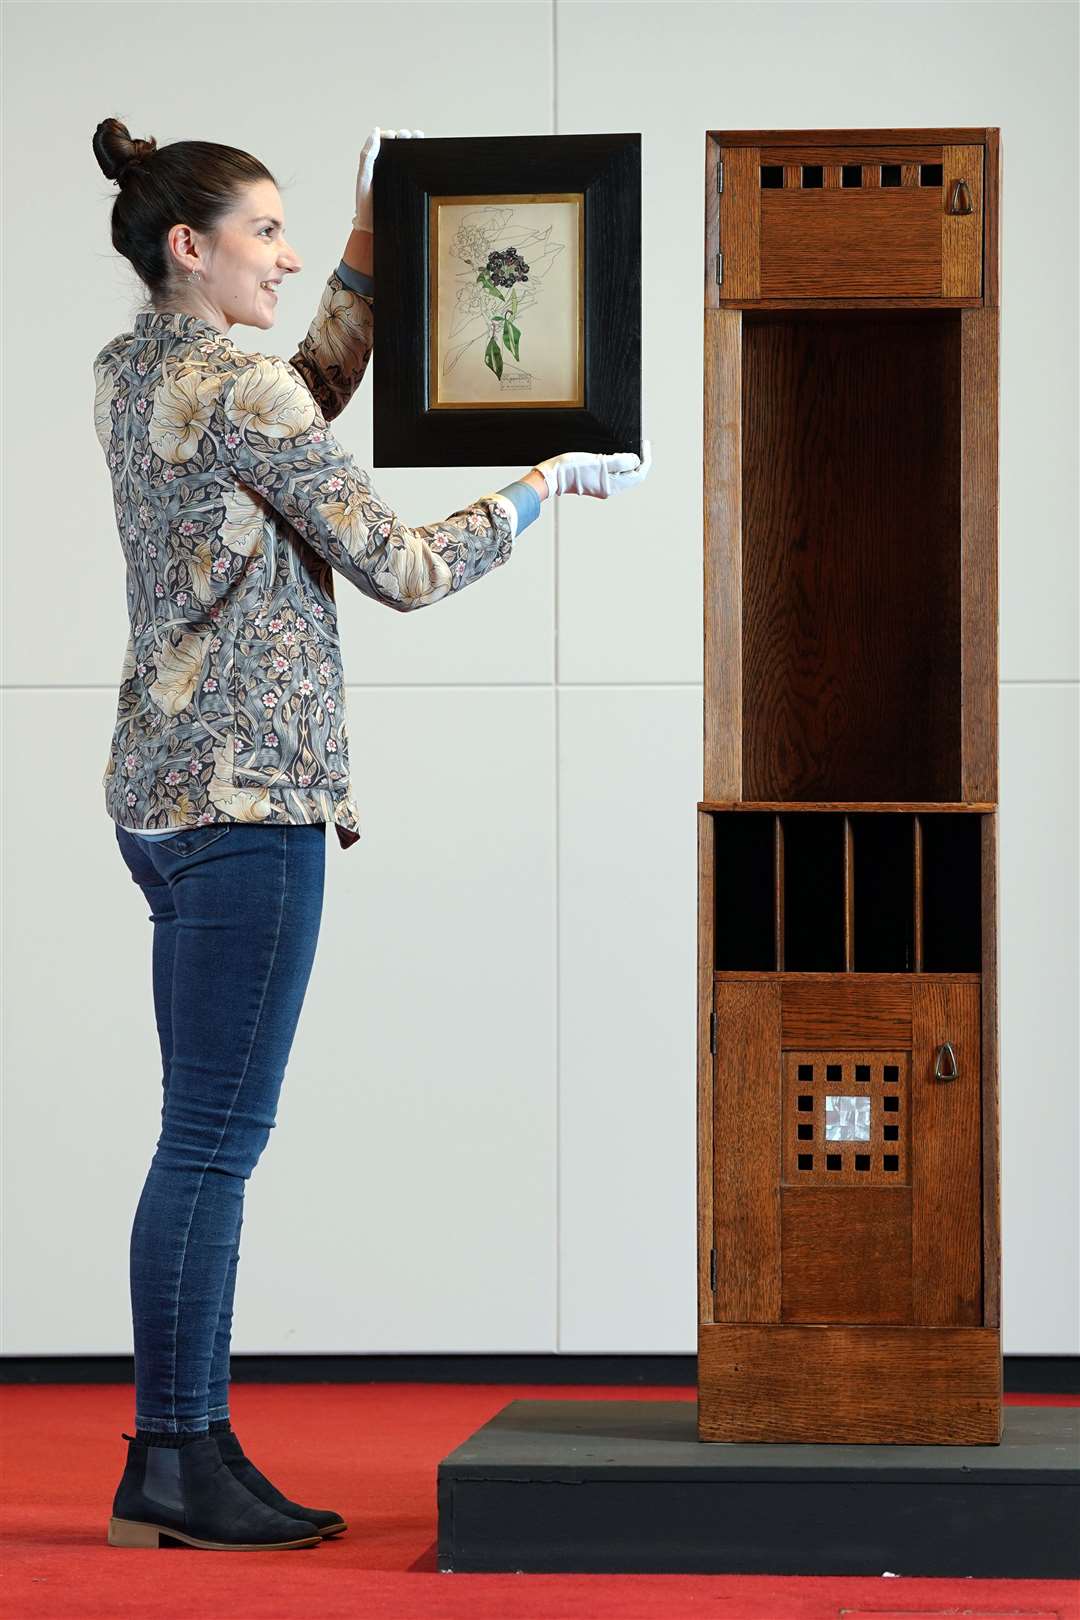 Design specialist Olivia Ross with the Mackintosh works that will be part of the auction (Lyon & Turnbull/PA)